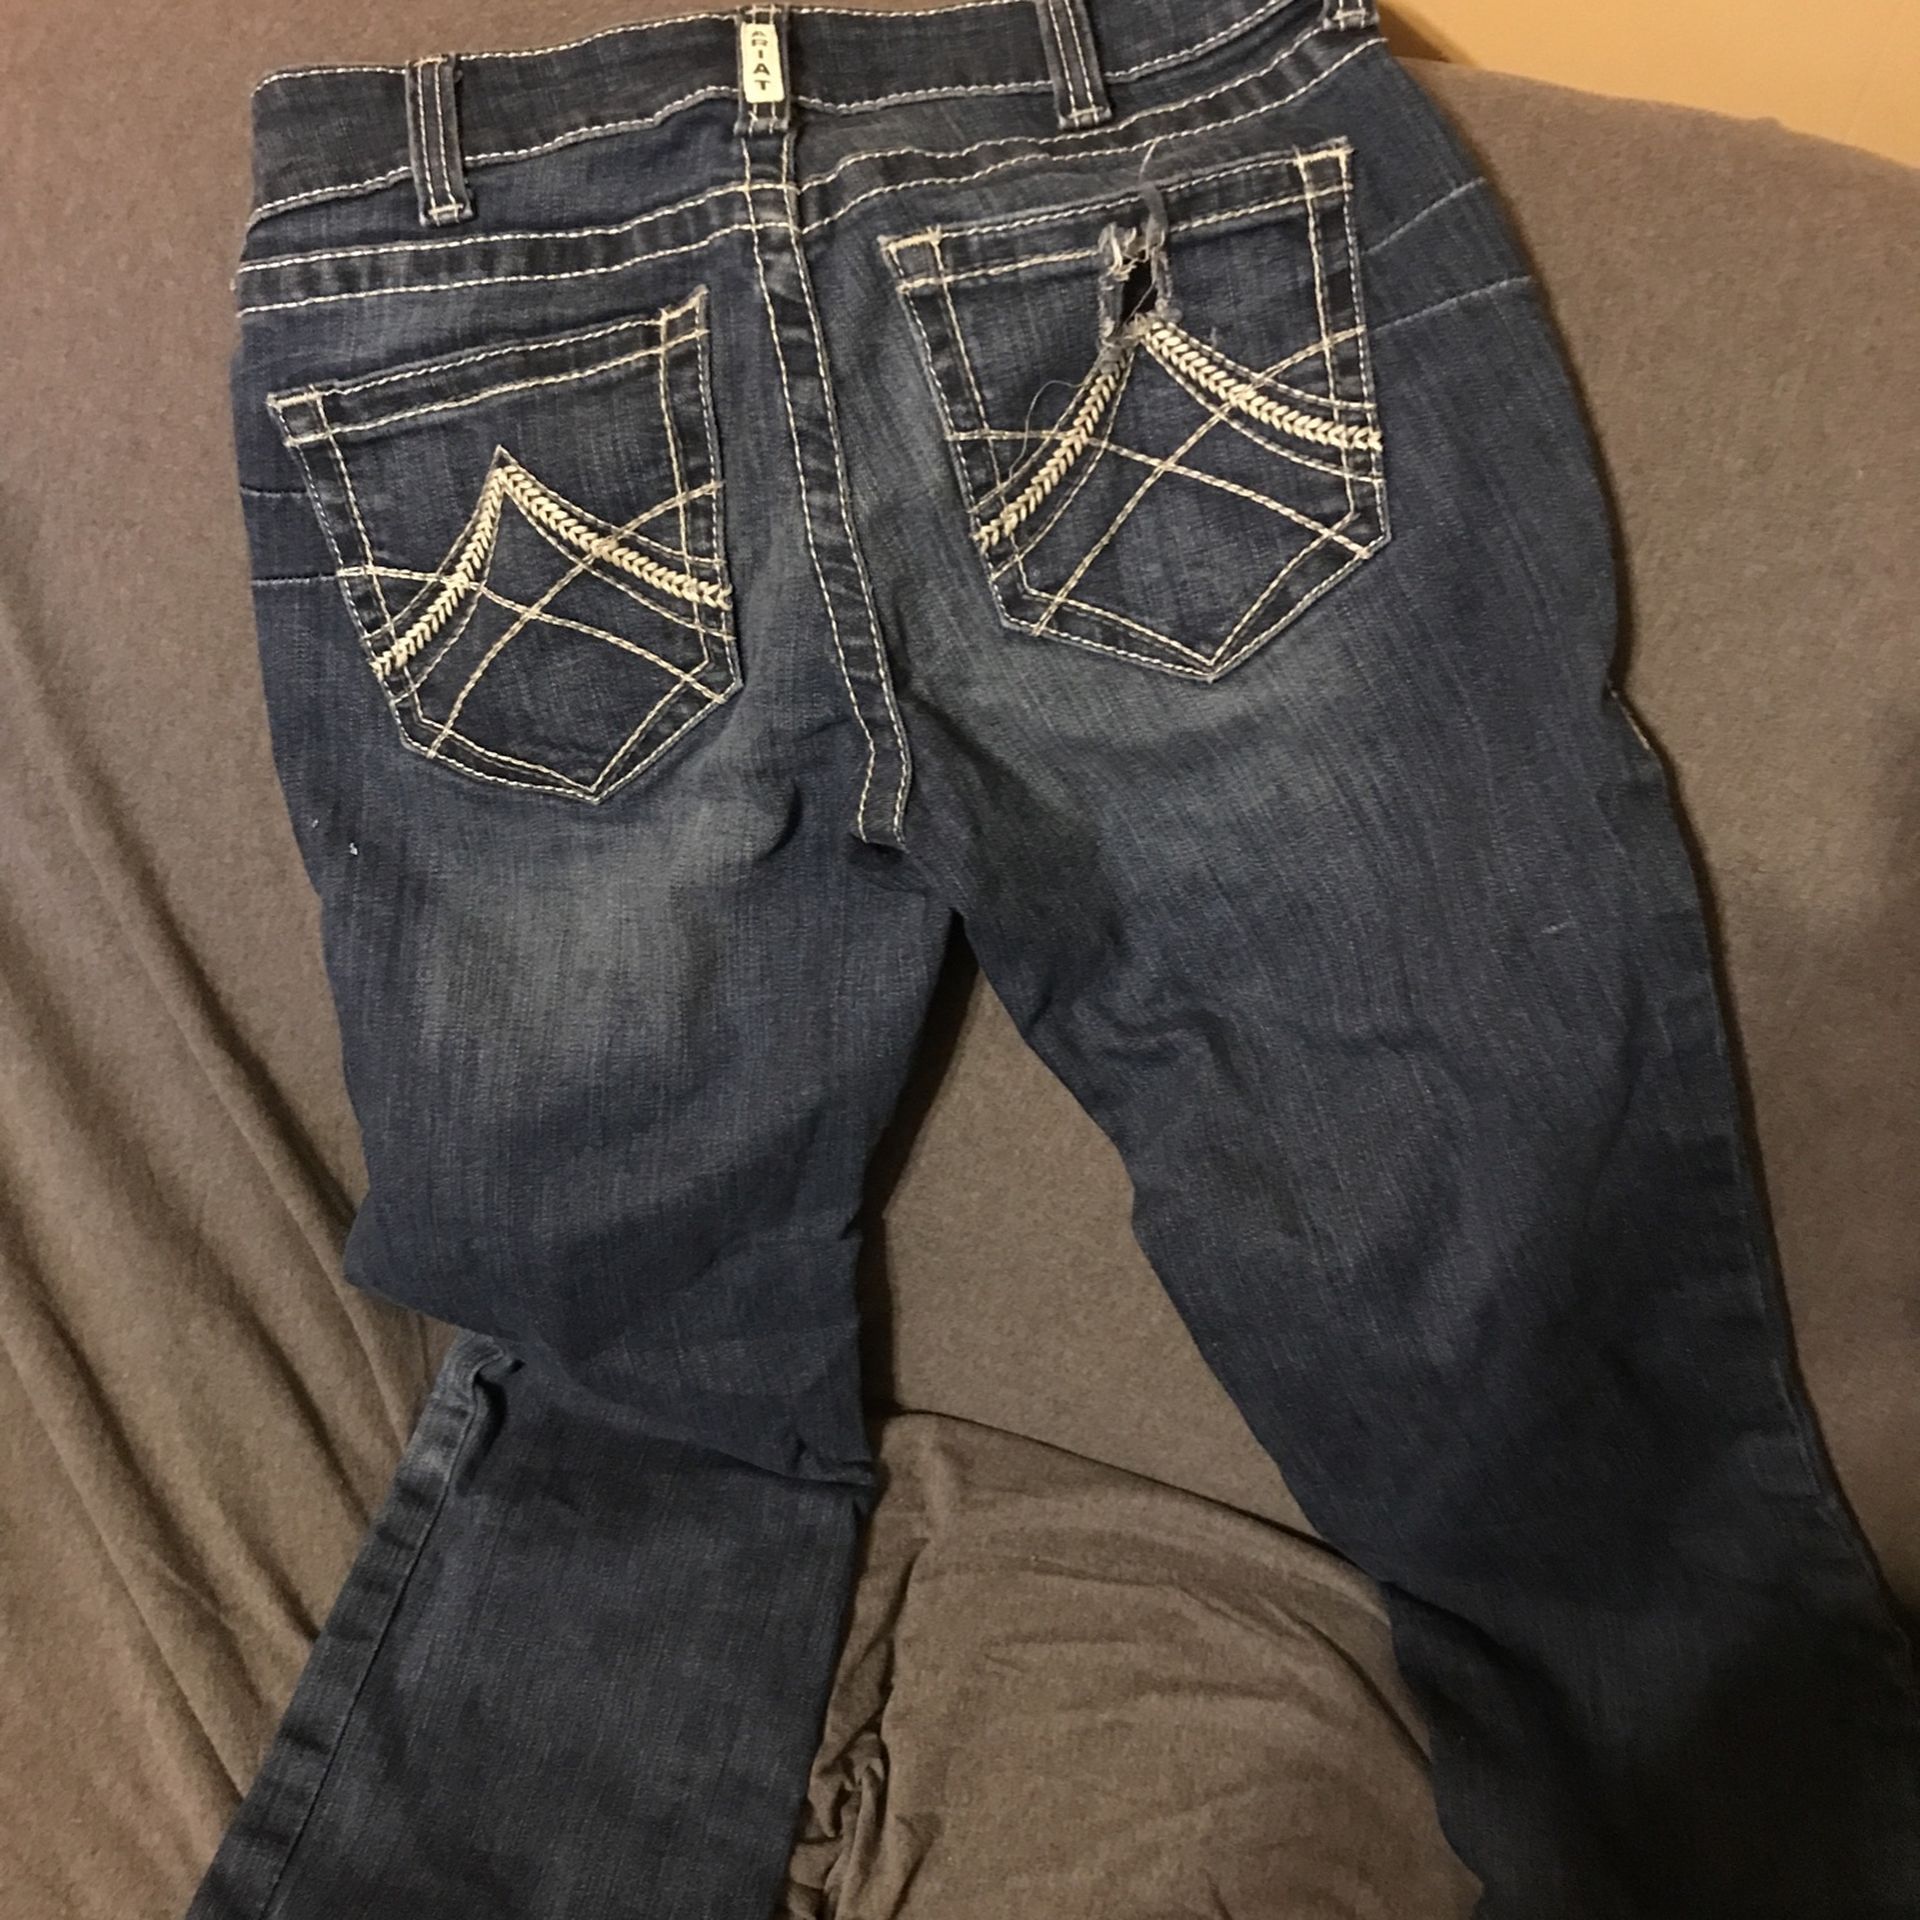 Ariat Jeans Size 27r